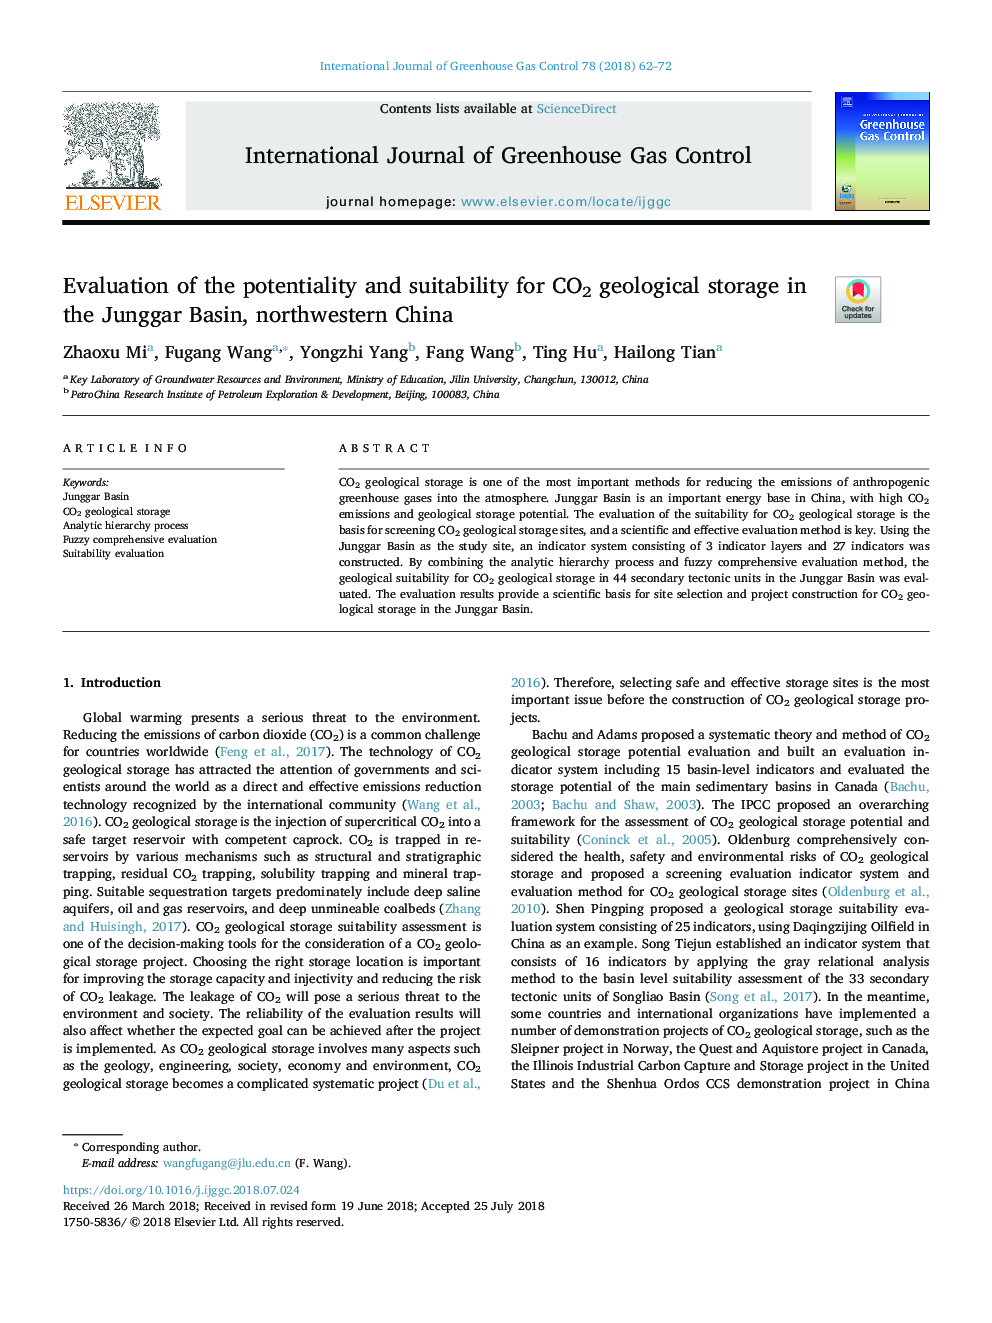 Evaluation of the potentiality and suitability for CO2 geological storage in the Junggar Basin, northwestern China